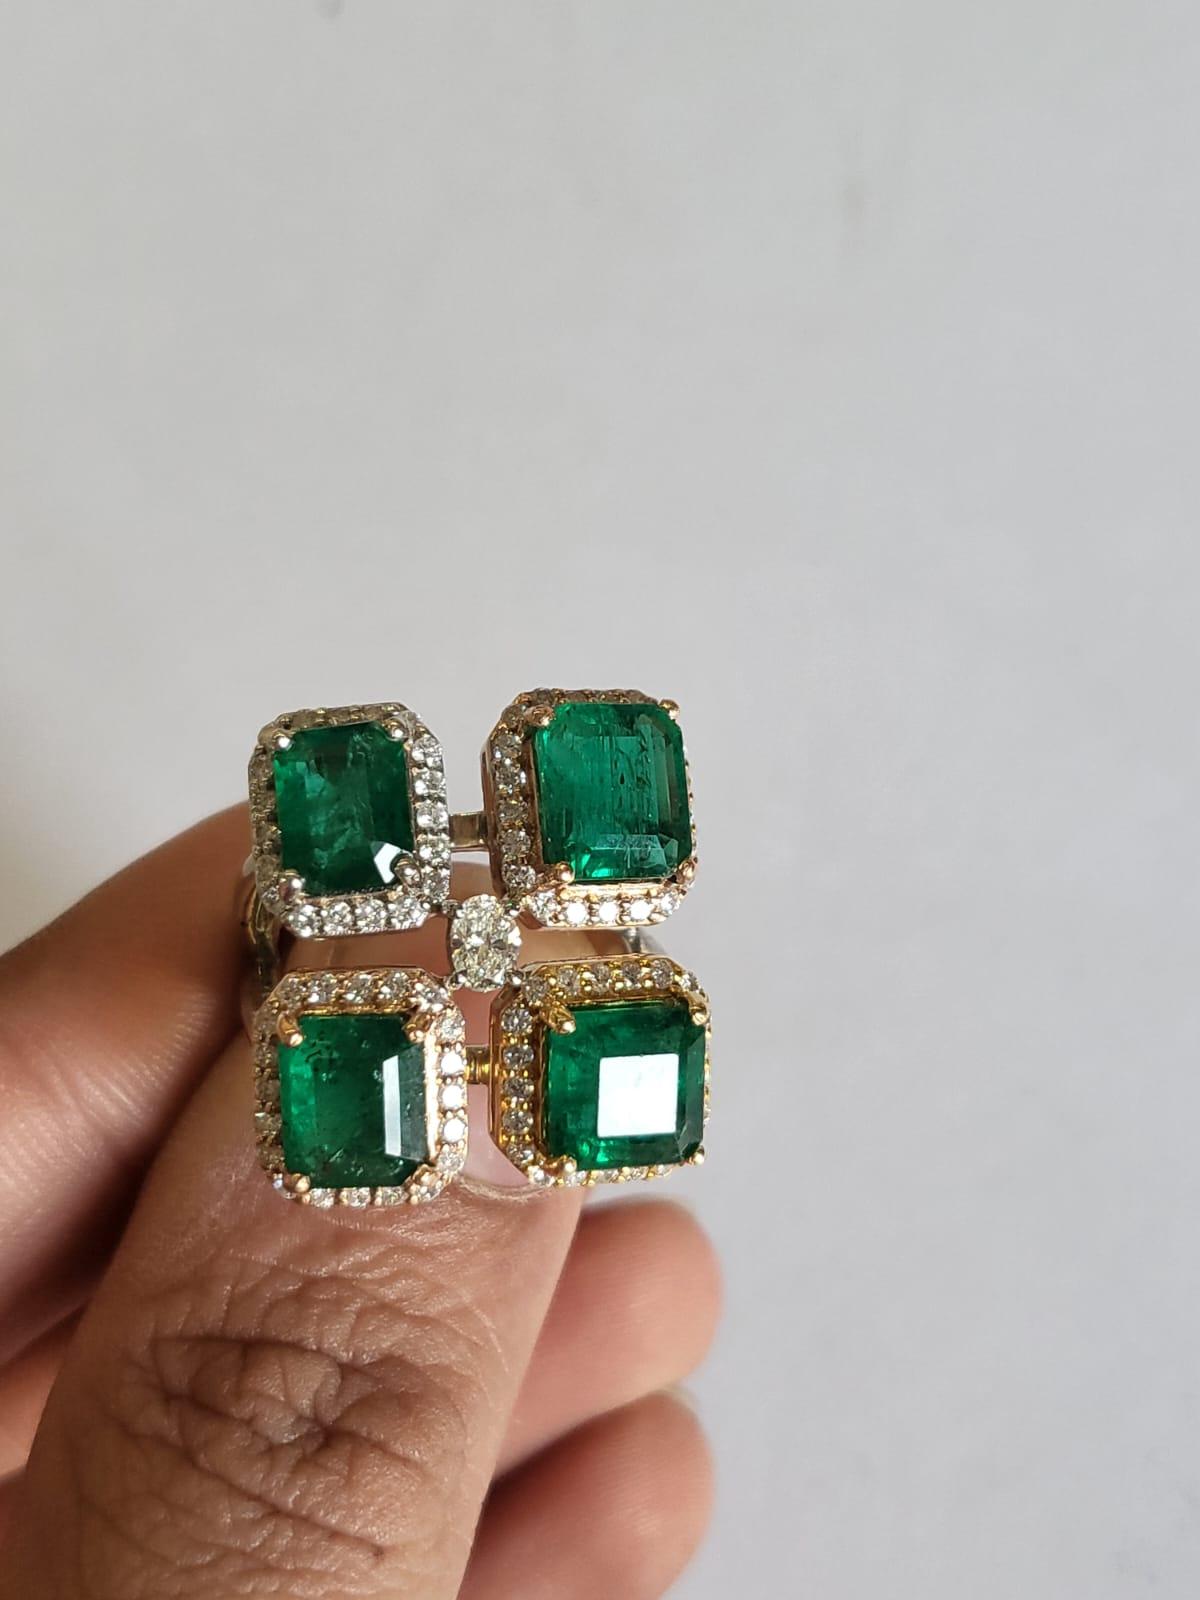 A very gorgeous and one of a kind, Emerald Cluster Ring set in 18K Rose, Yellow & White Gold & Diamonds. The weight of the Emeralds is 6.70 carats. The Emeralds are completely natural, without any treatment and is of Zambian origin. The weight of